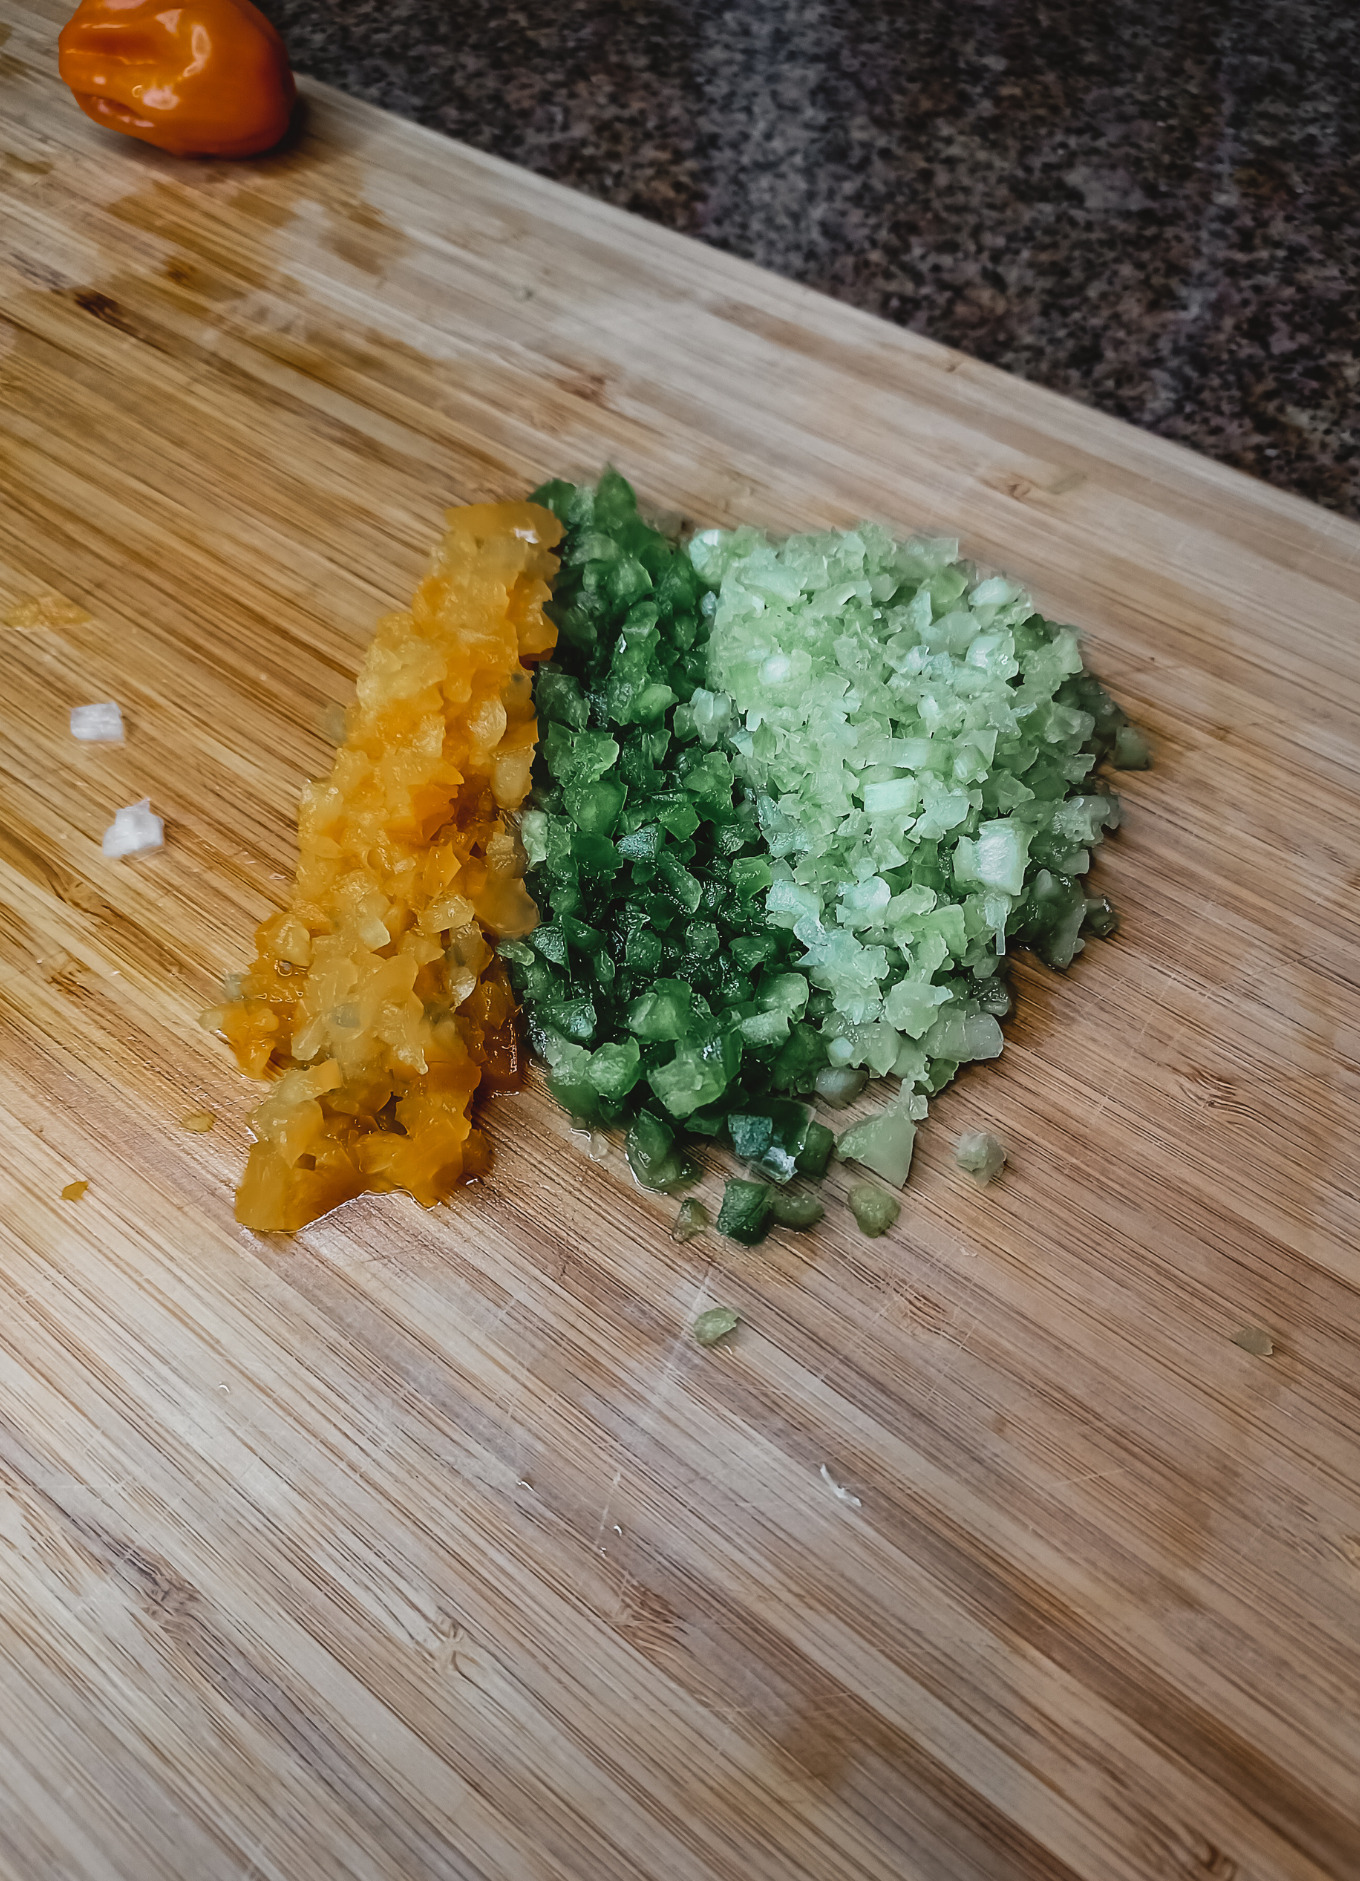 A cutting board with a habanero, yellow bell pepper, green pepper and celery